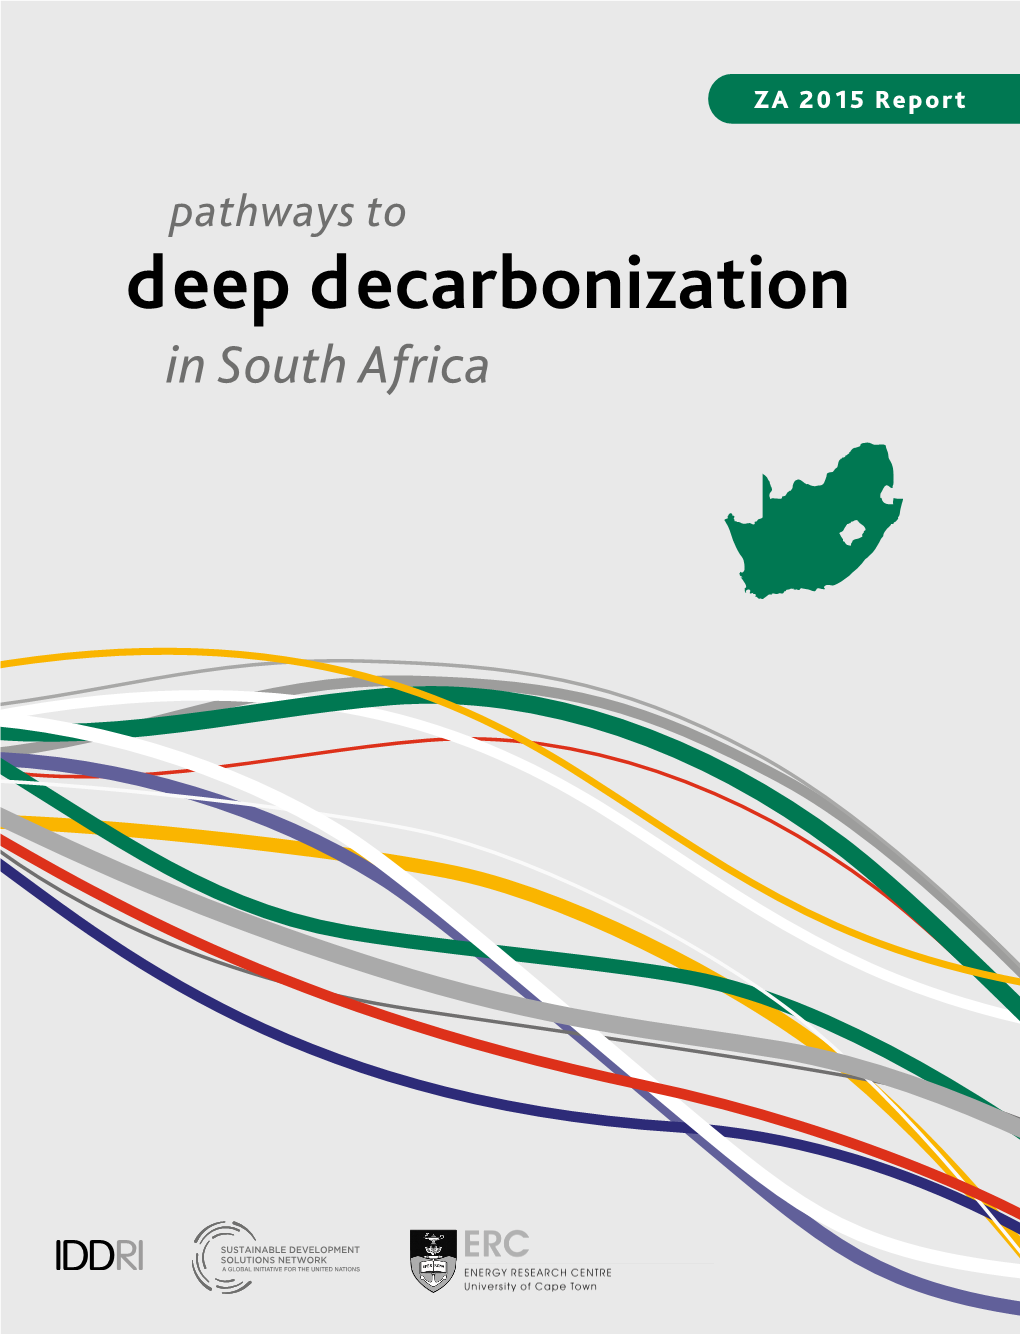 Deep Decarbonization in South Africa ﻿